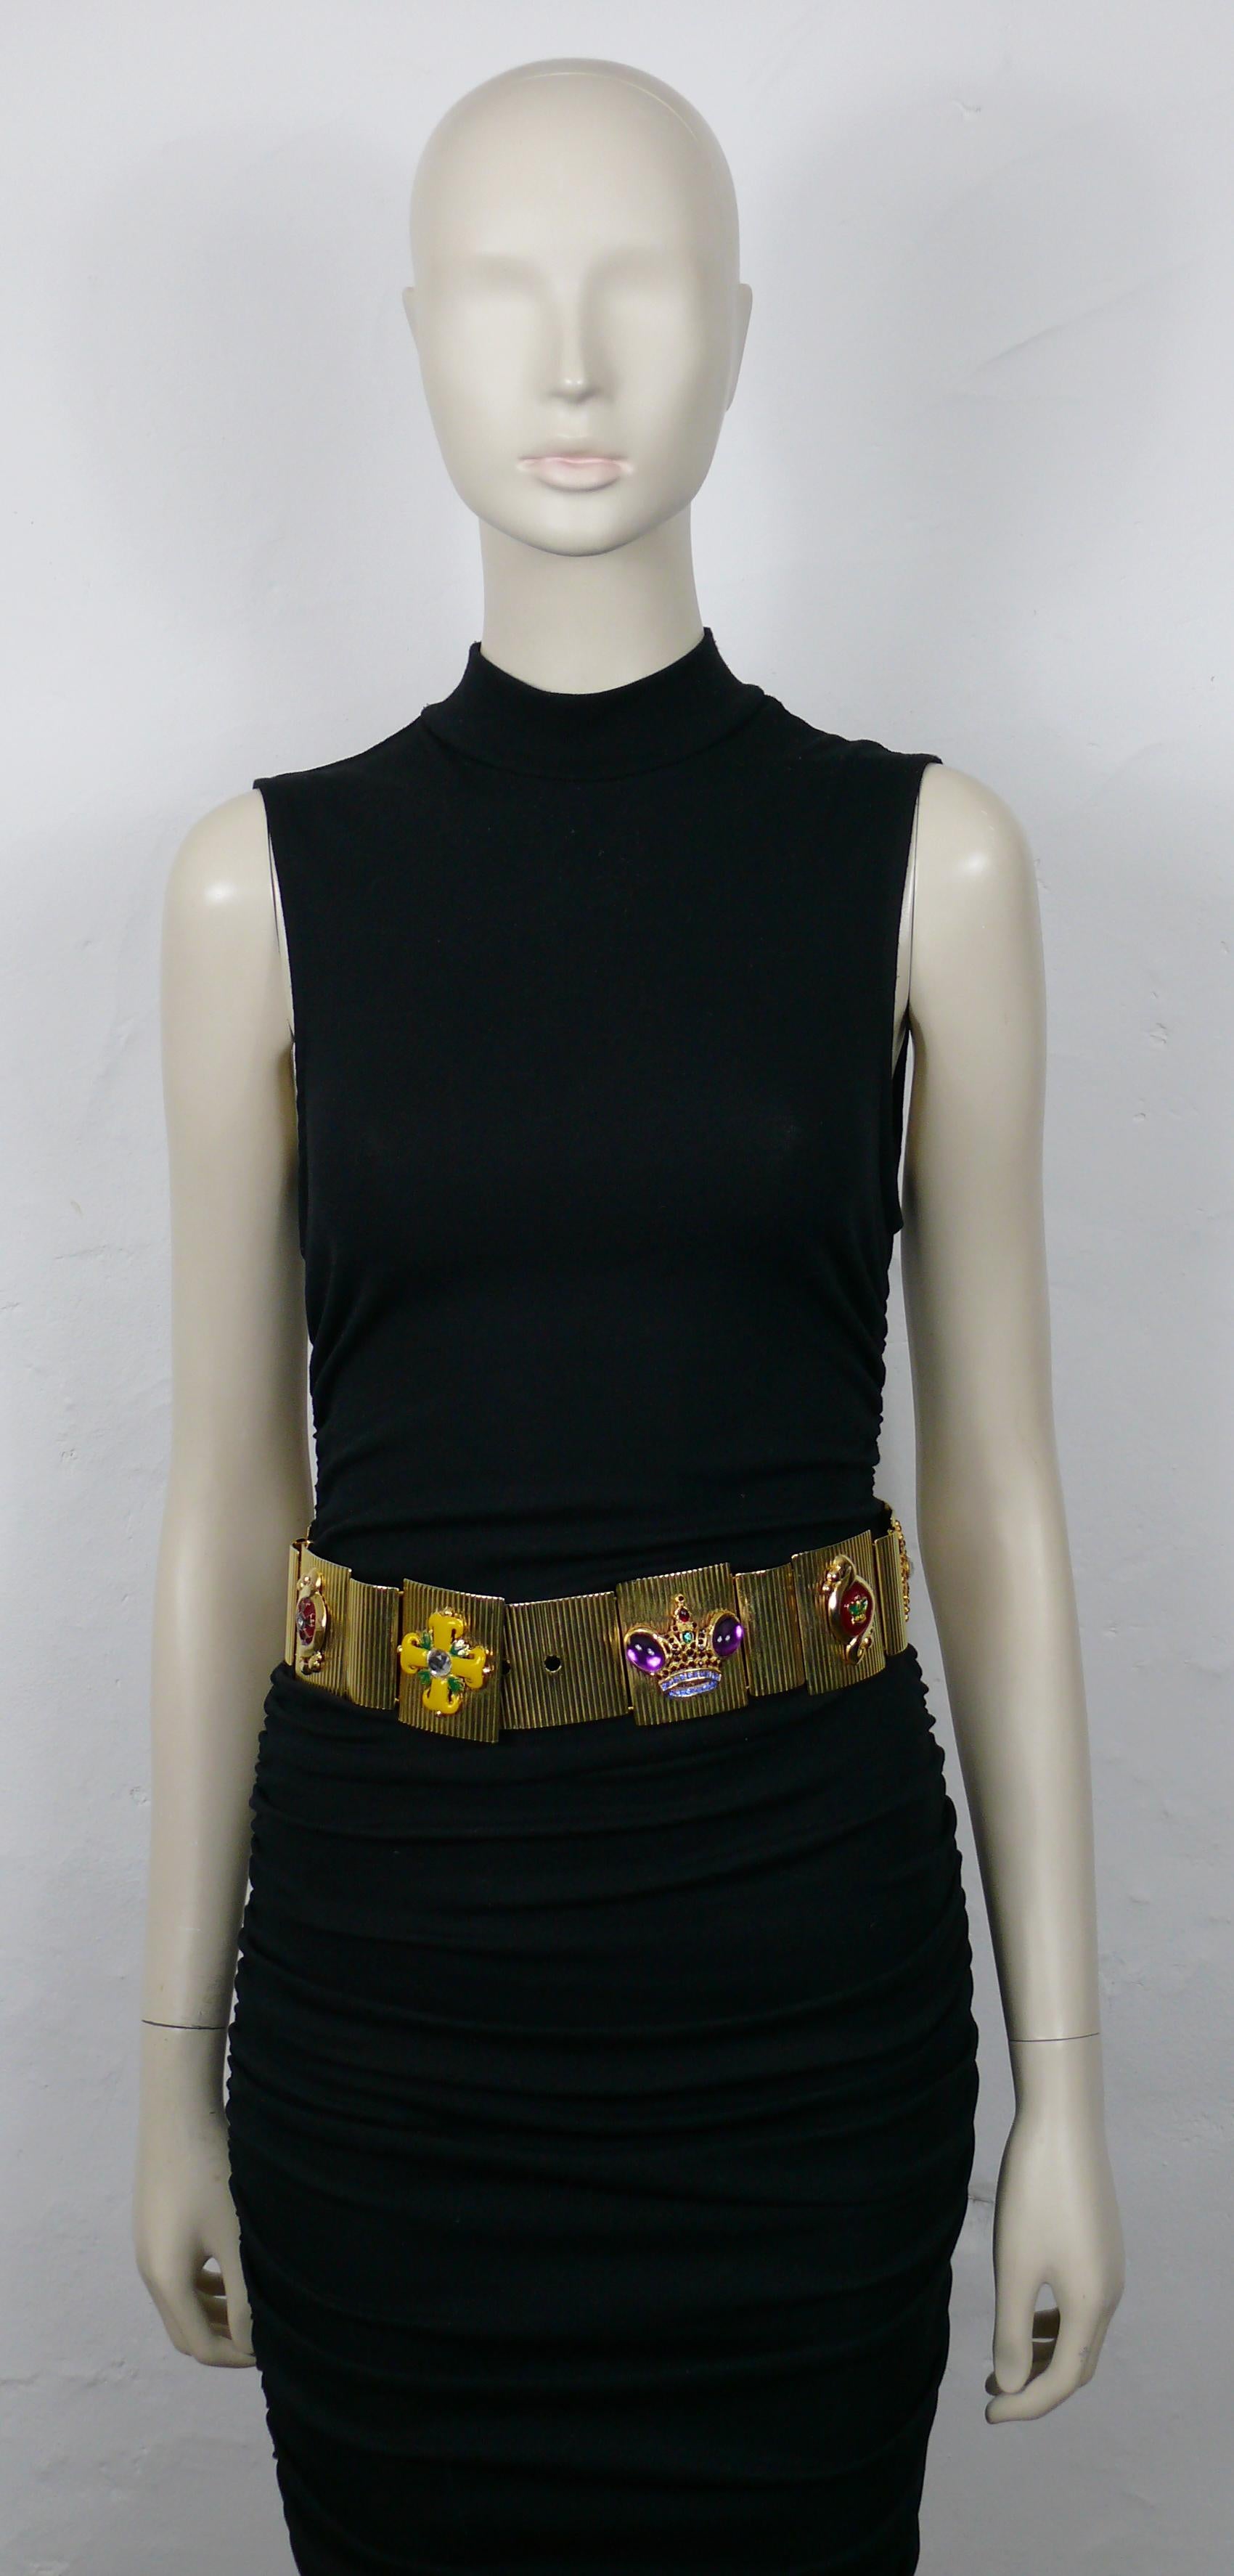 GIANNI VERSACE vintage HONORS & GLORIES belt featuring gold tone striped plate links with medals and crowns embellished with multicolor crystals, acrylic crystals, resin cabochons and enamel.

Hook clasp closure
Adjustable length.

Embossed GIANNI